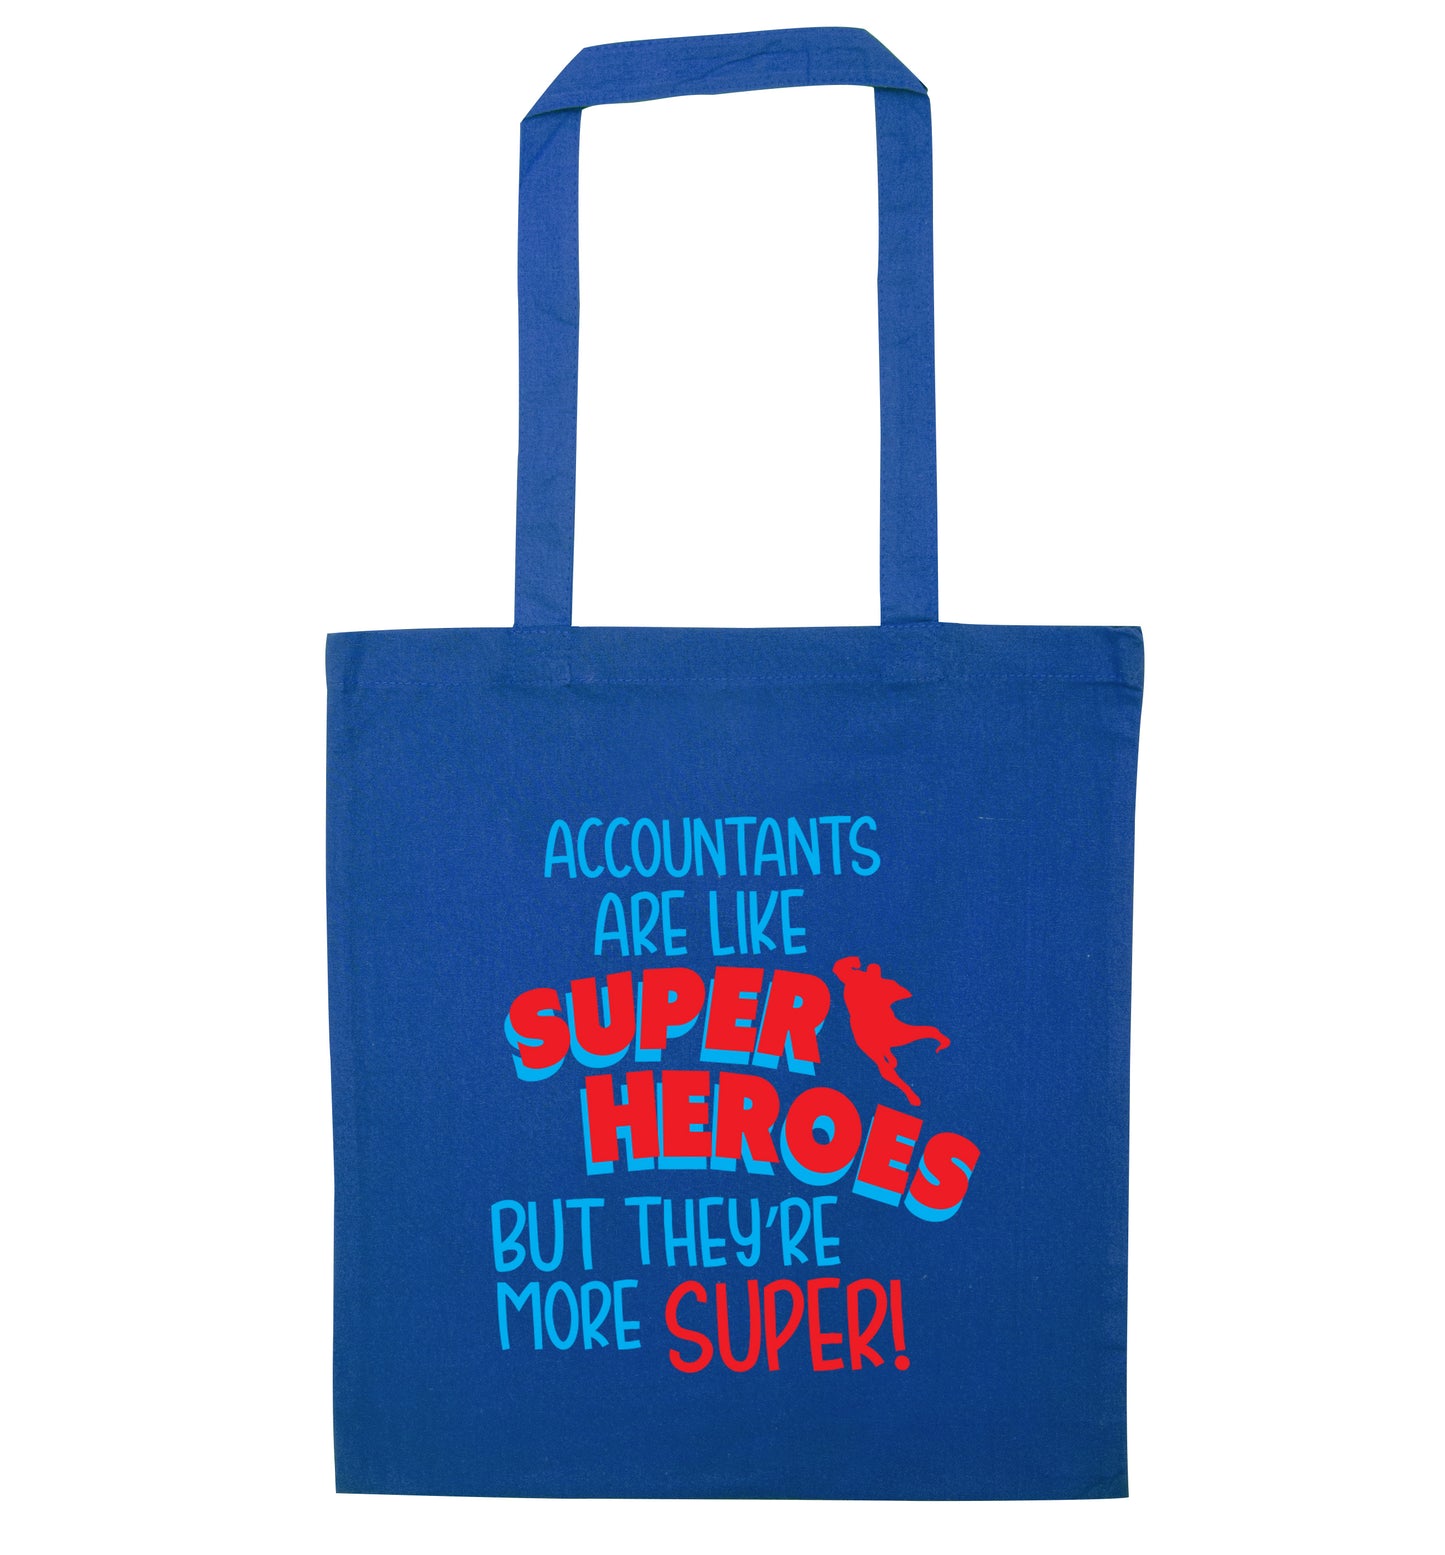 Accountants are like superheroes but they're more super blue tote bag